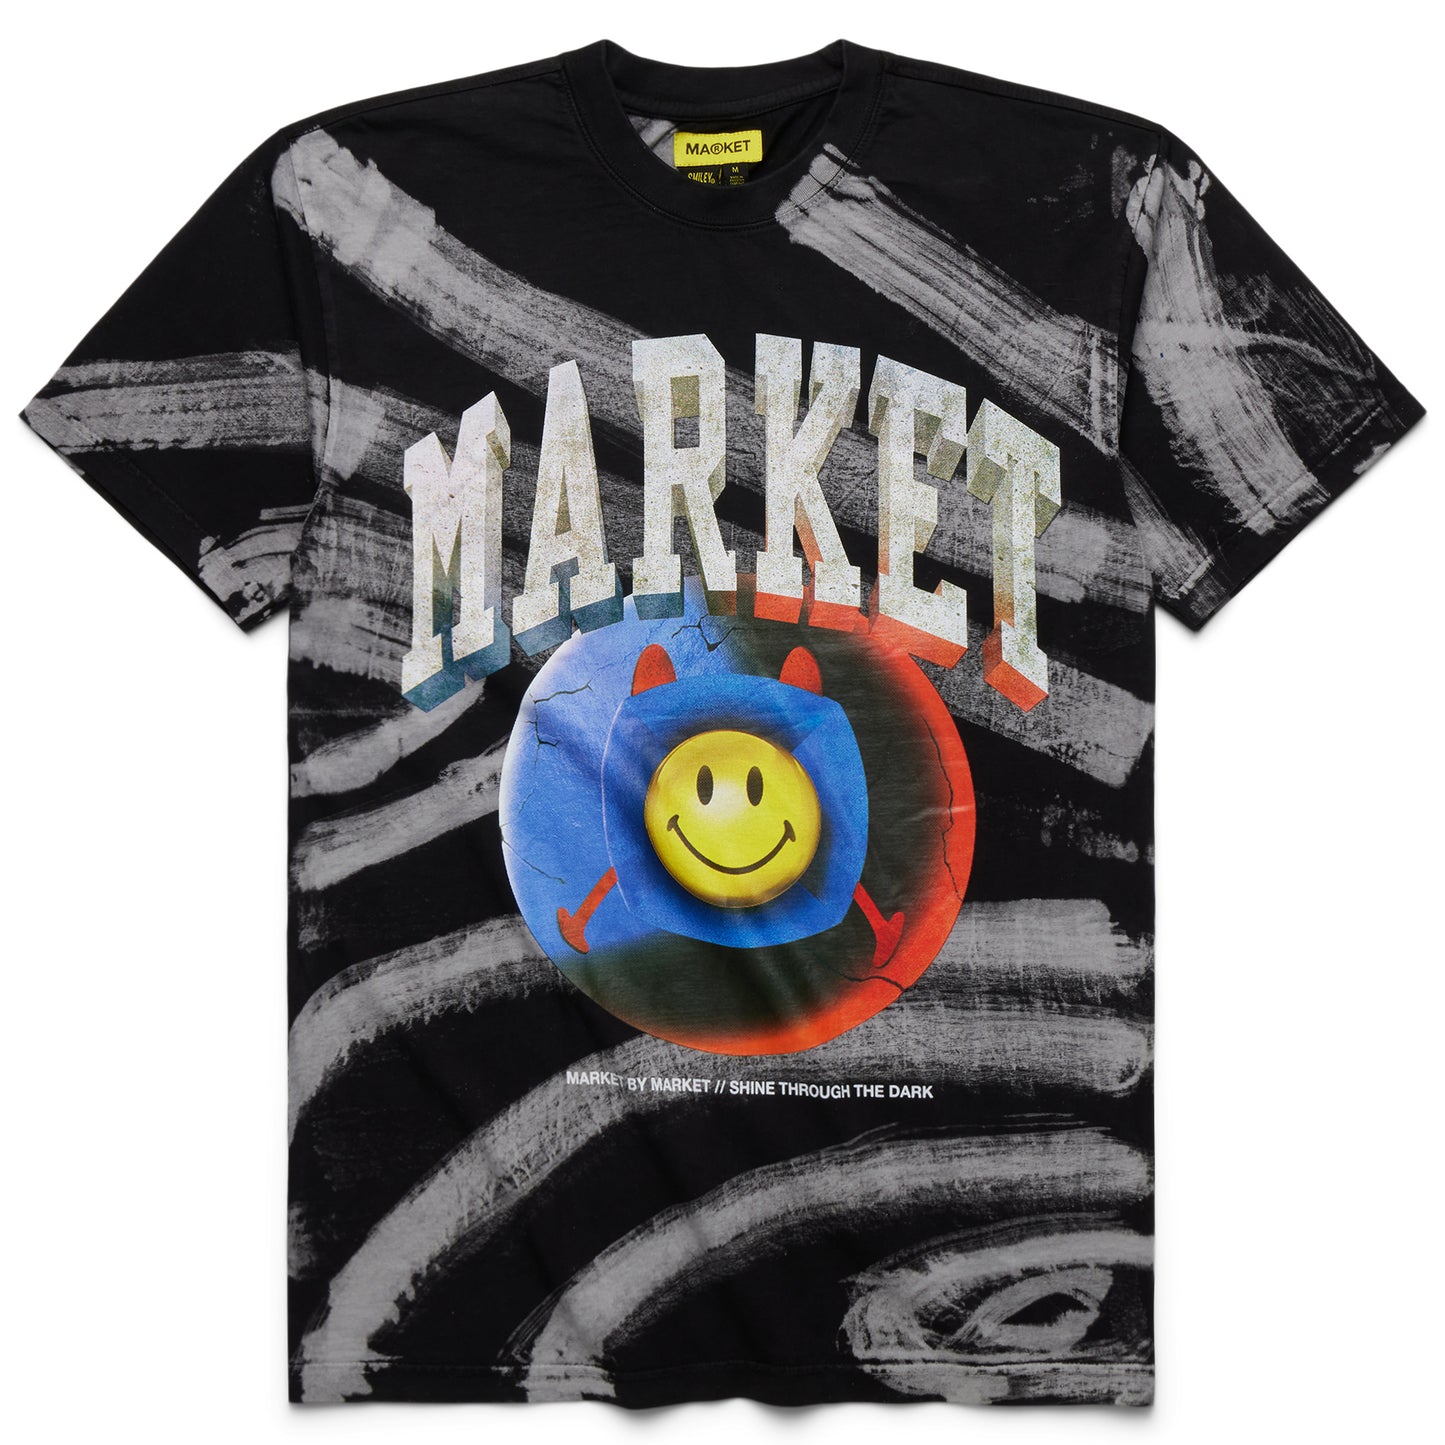 MARKET Smiley Happiness Within Tie Dye T-Shirt